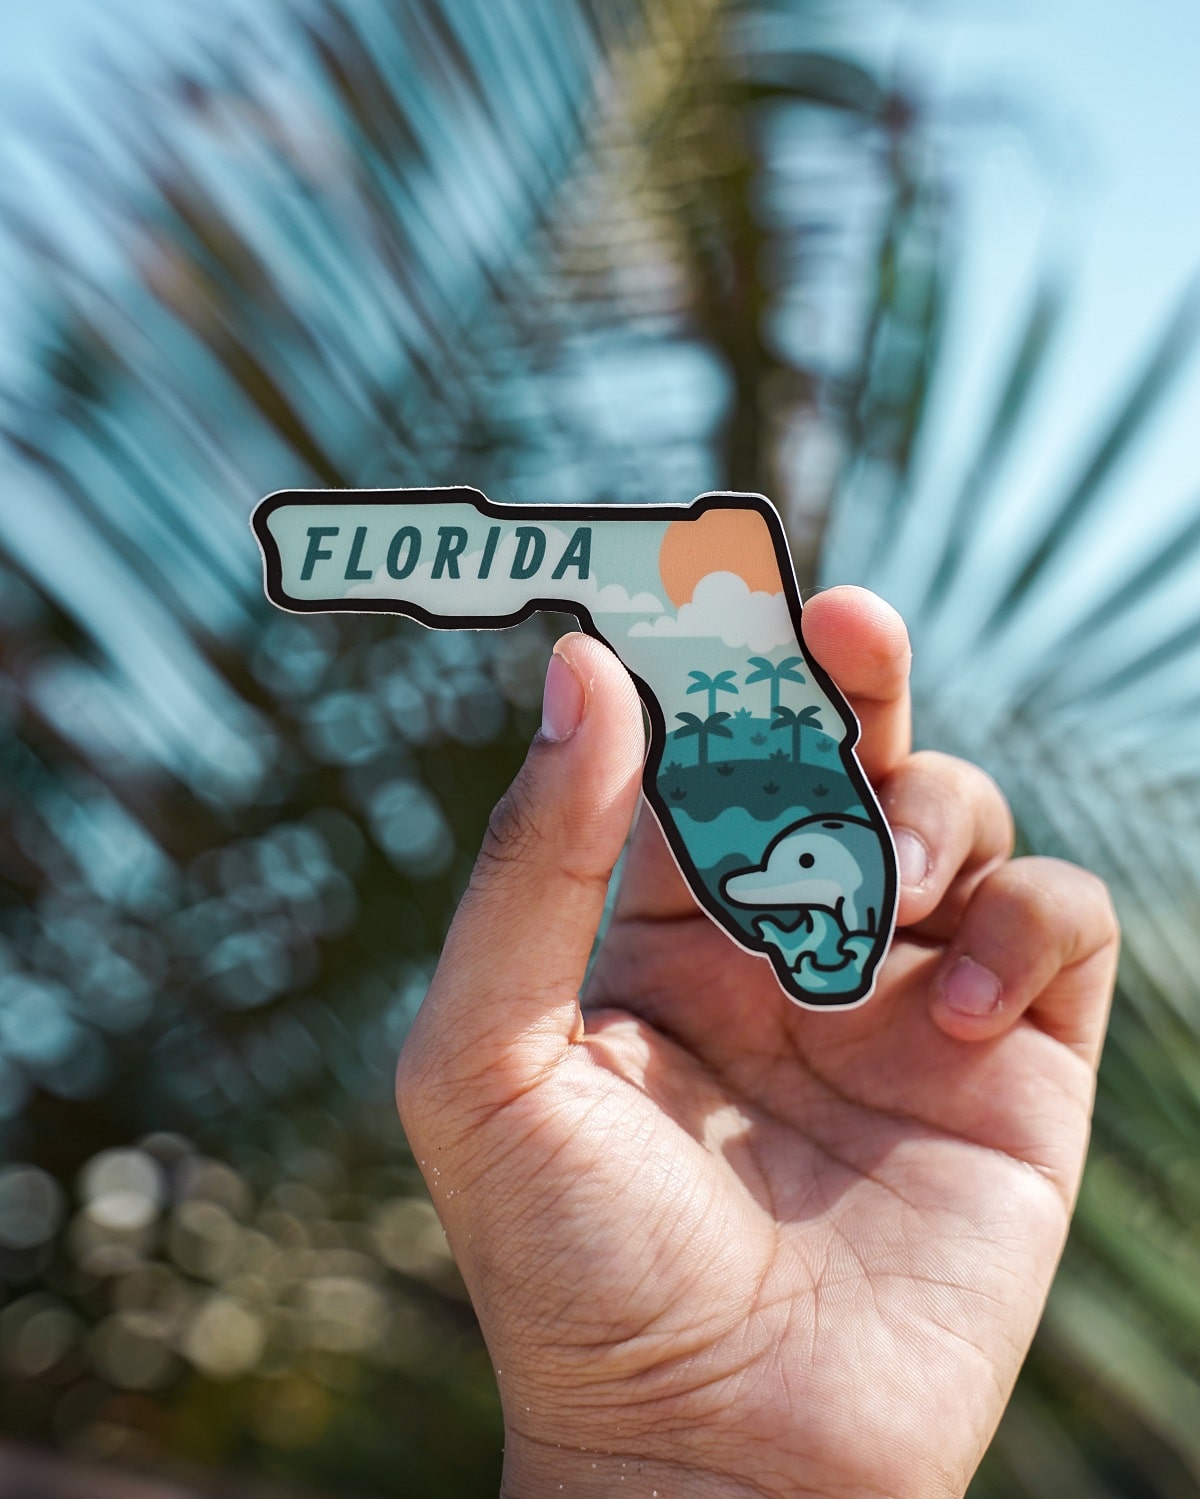 A Useful List of Fun Things to Do in Florida